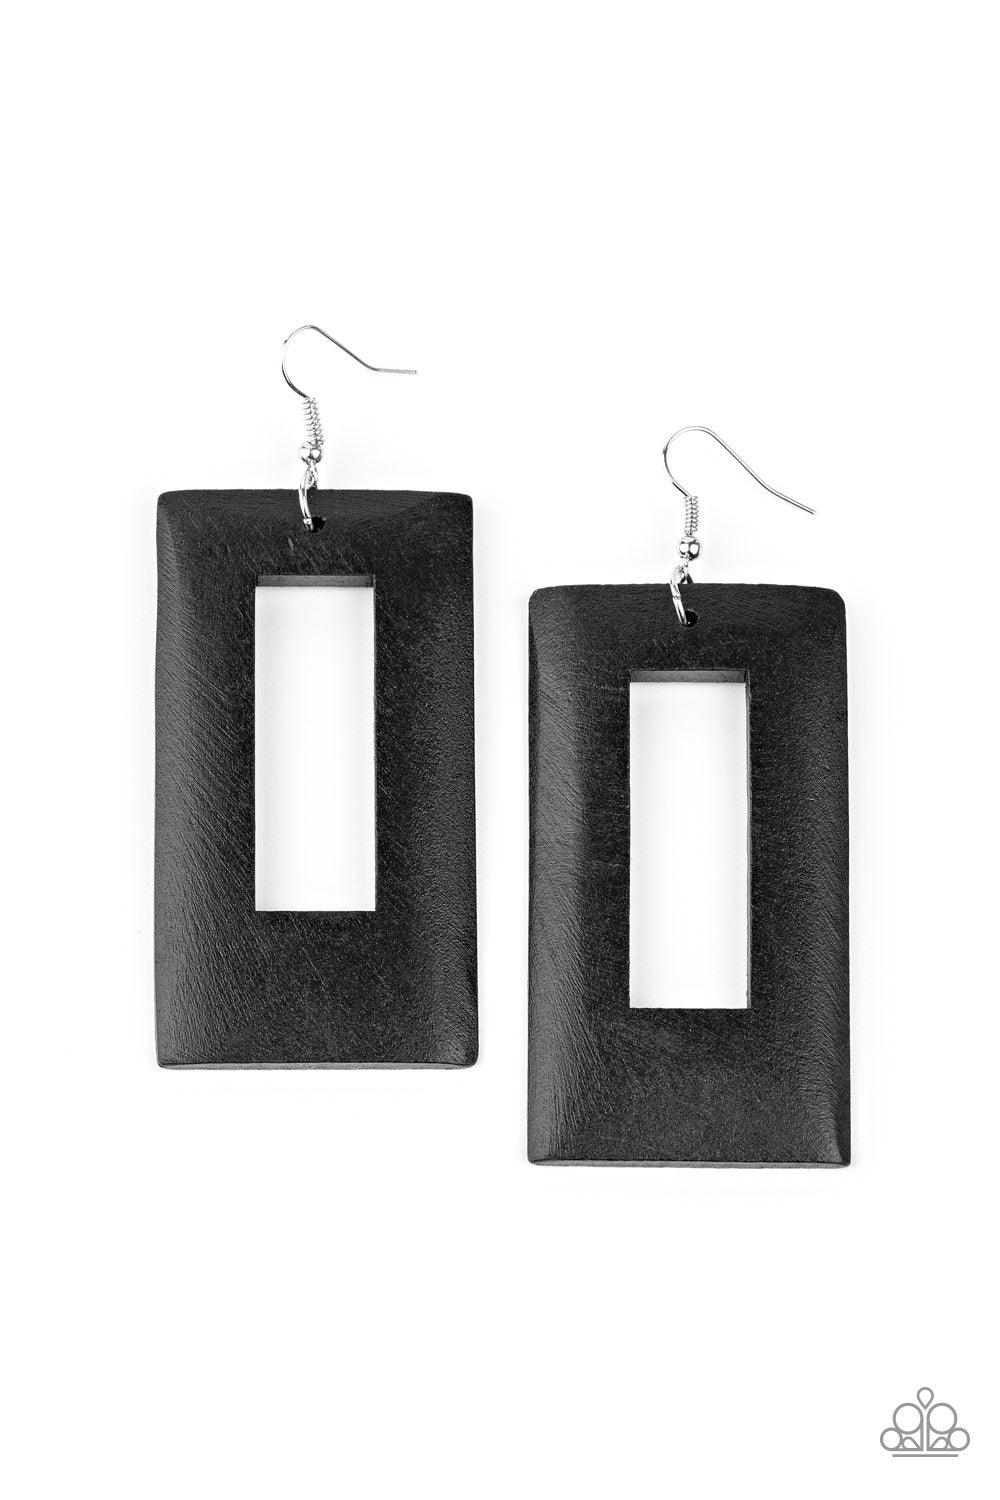 Paparazzi Accessories Totally Framed - Black Brushed in a neutral black finish, a thick rectangular wooden frame swings from the ear for a retro look. Earring attaches to a standard fishhook fitting. Sold as one pair of earrings. Jewelry